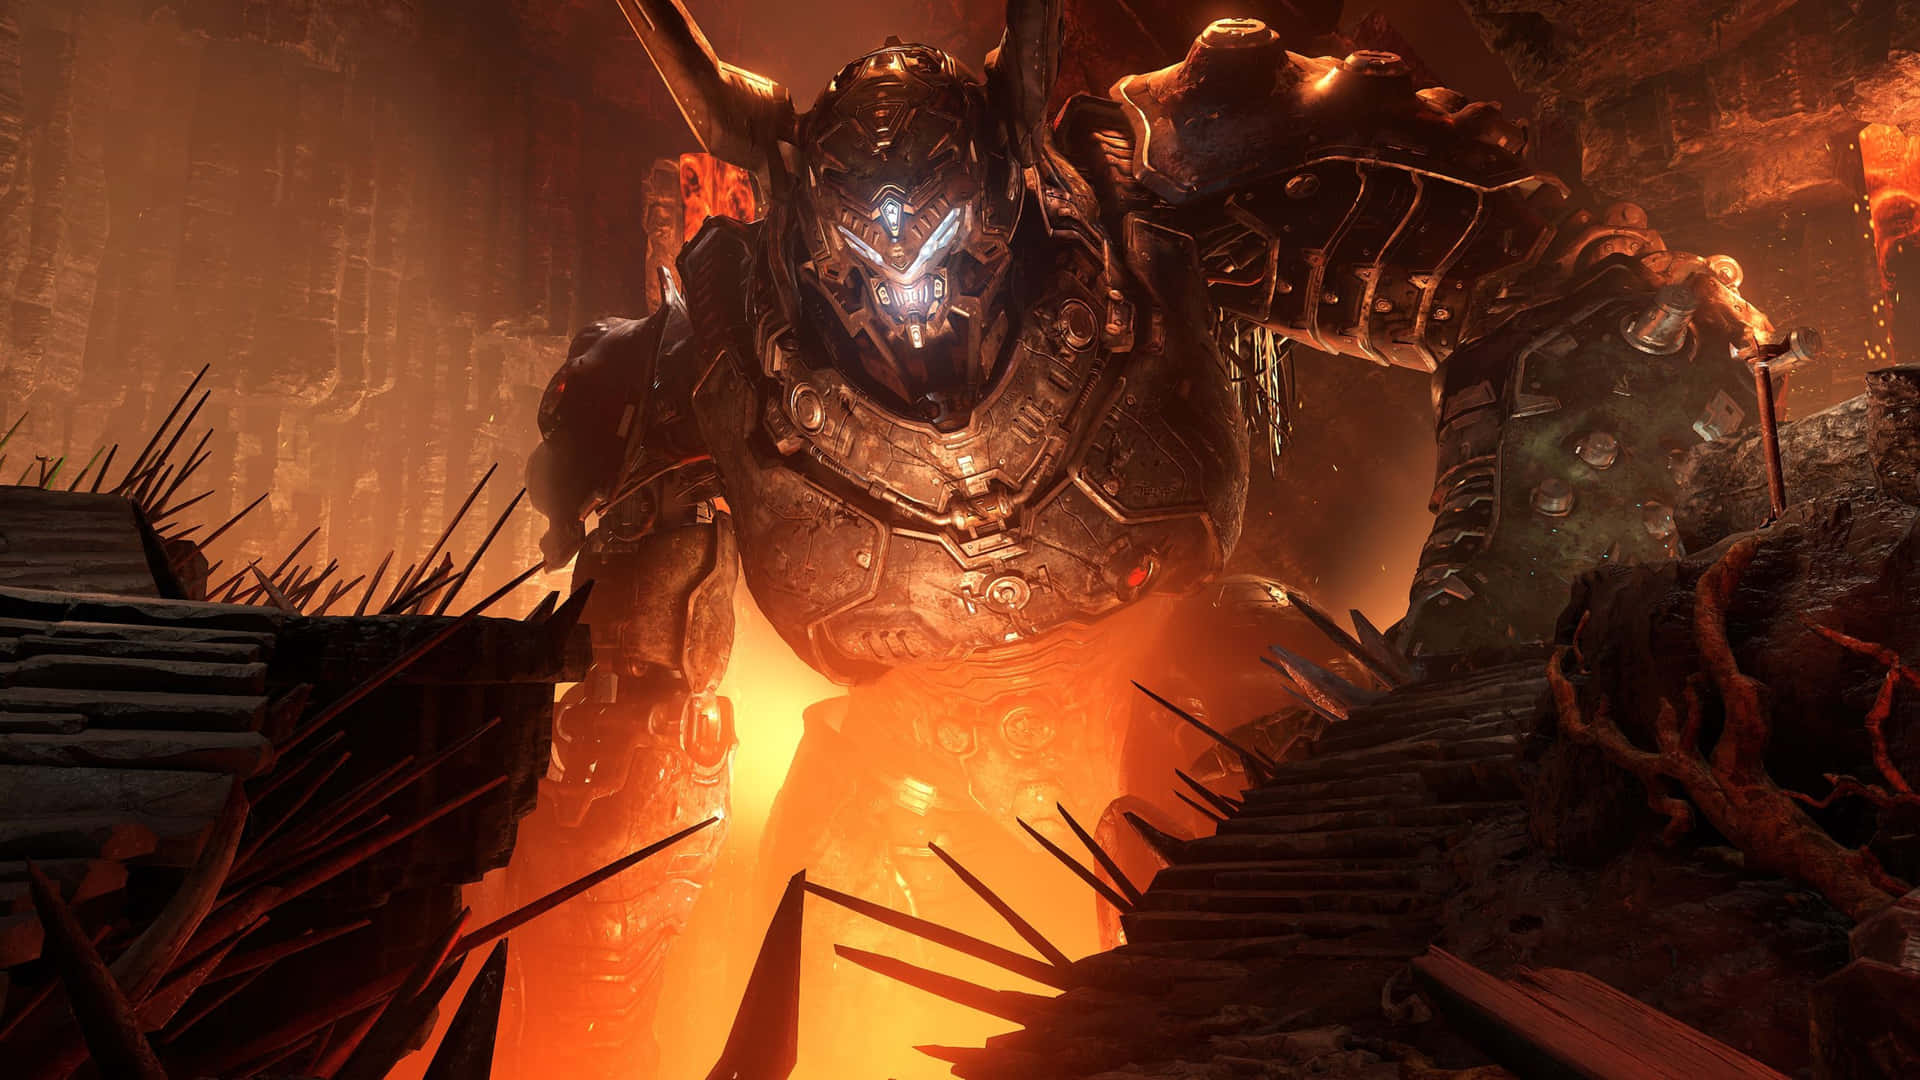 Fight off the forces of Hell using futuristic weapons in DOOM Eternal Wallpaper